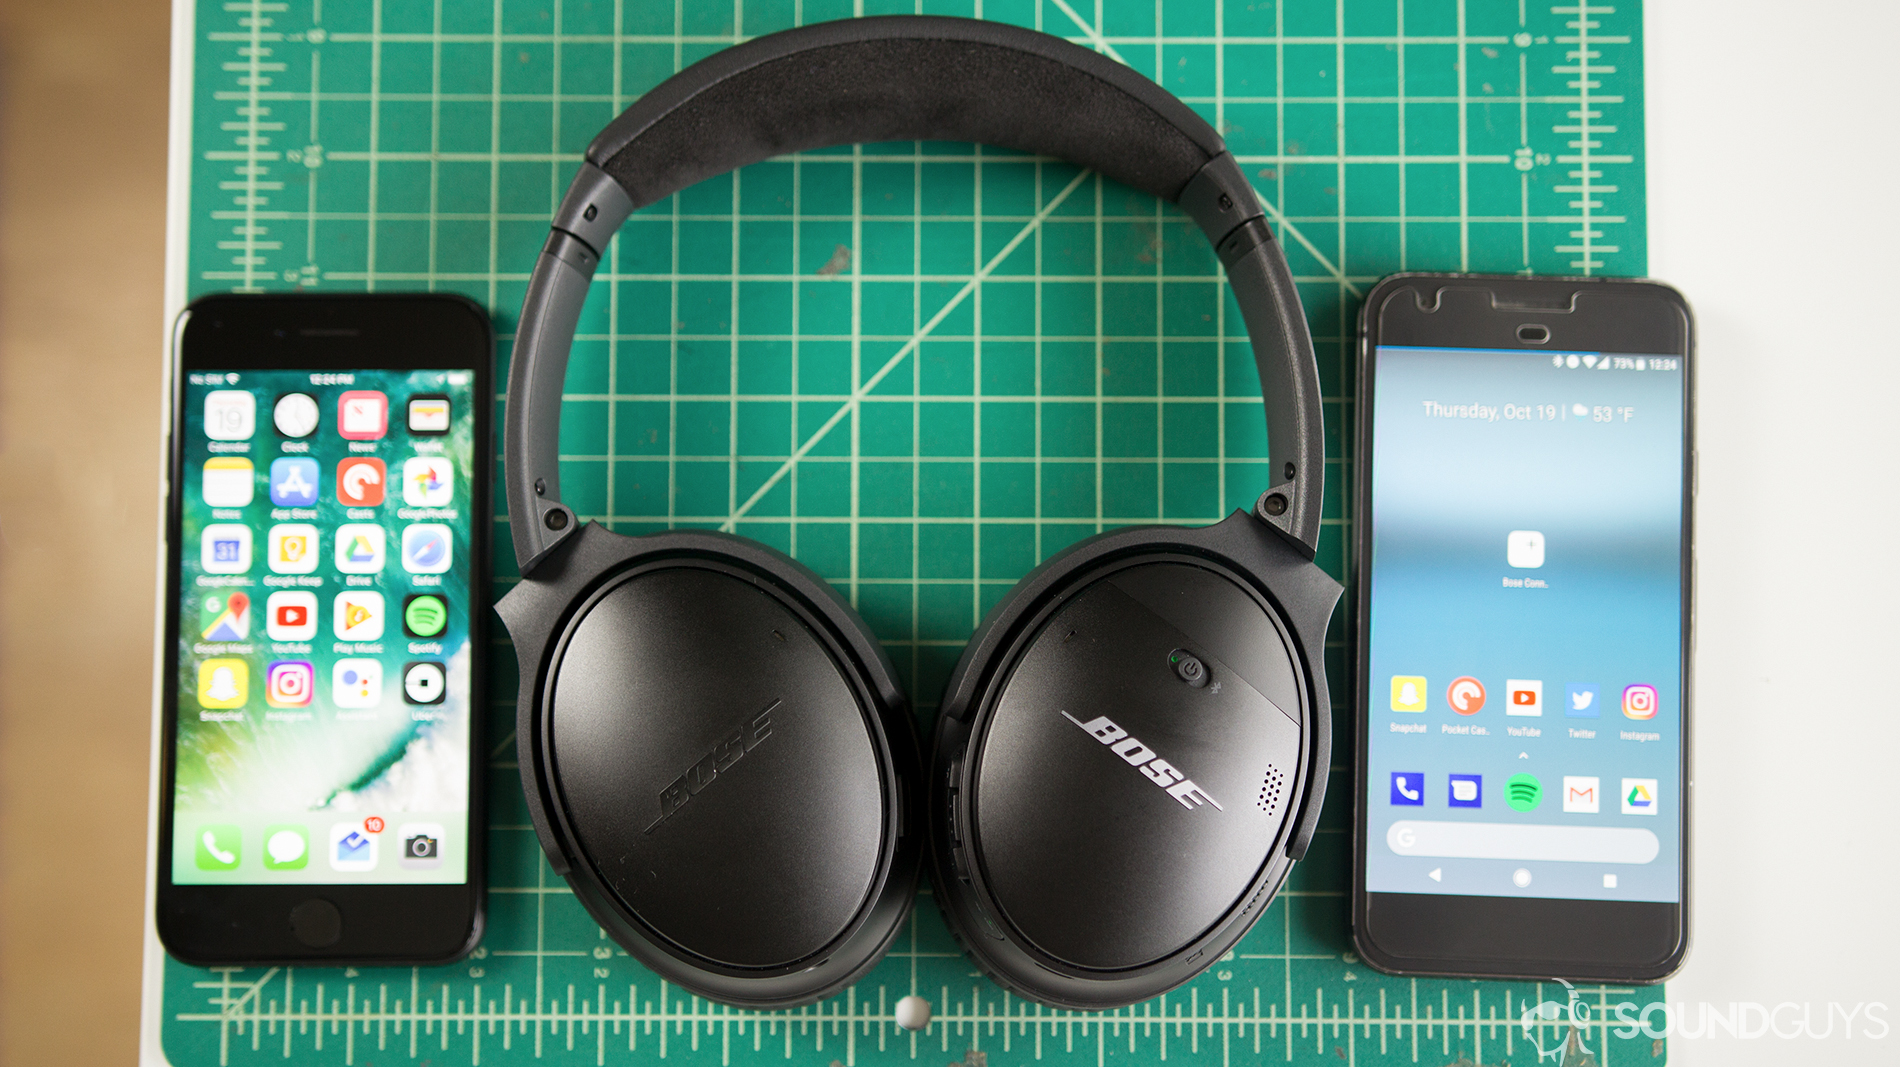 The Bose QuietComfort 35 II on a gridded surface next to two smartphones.